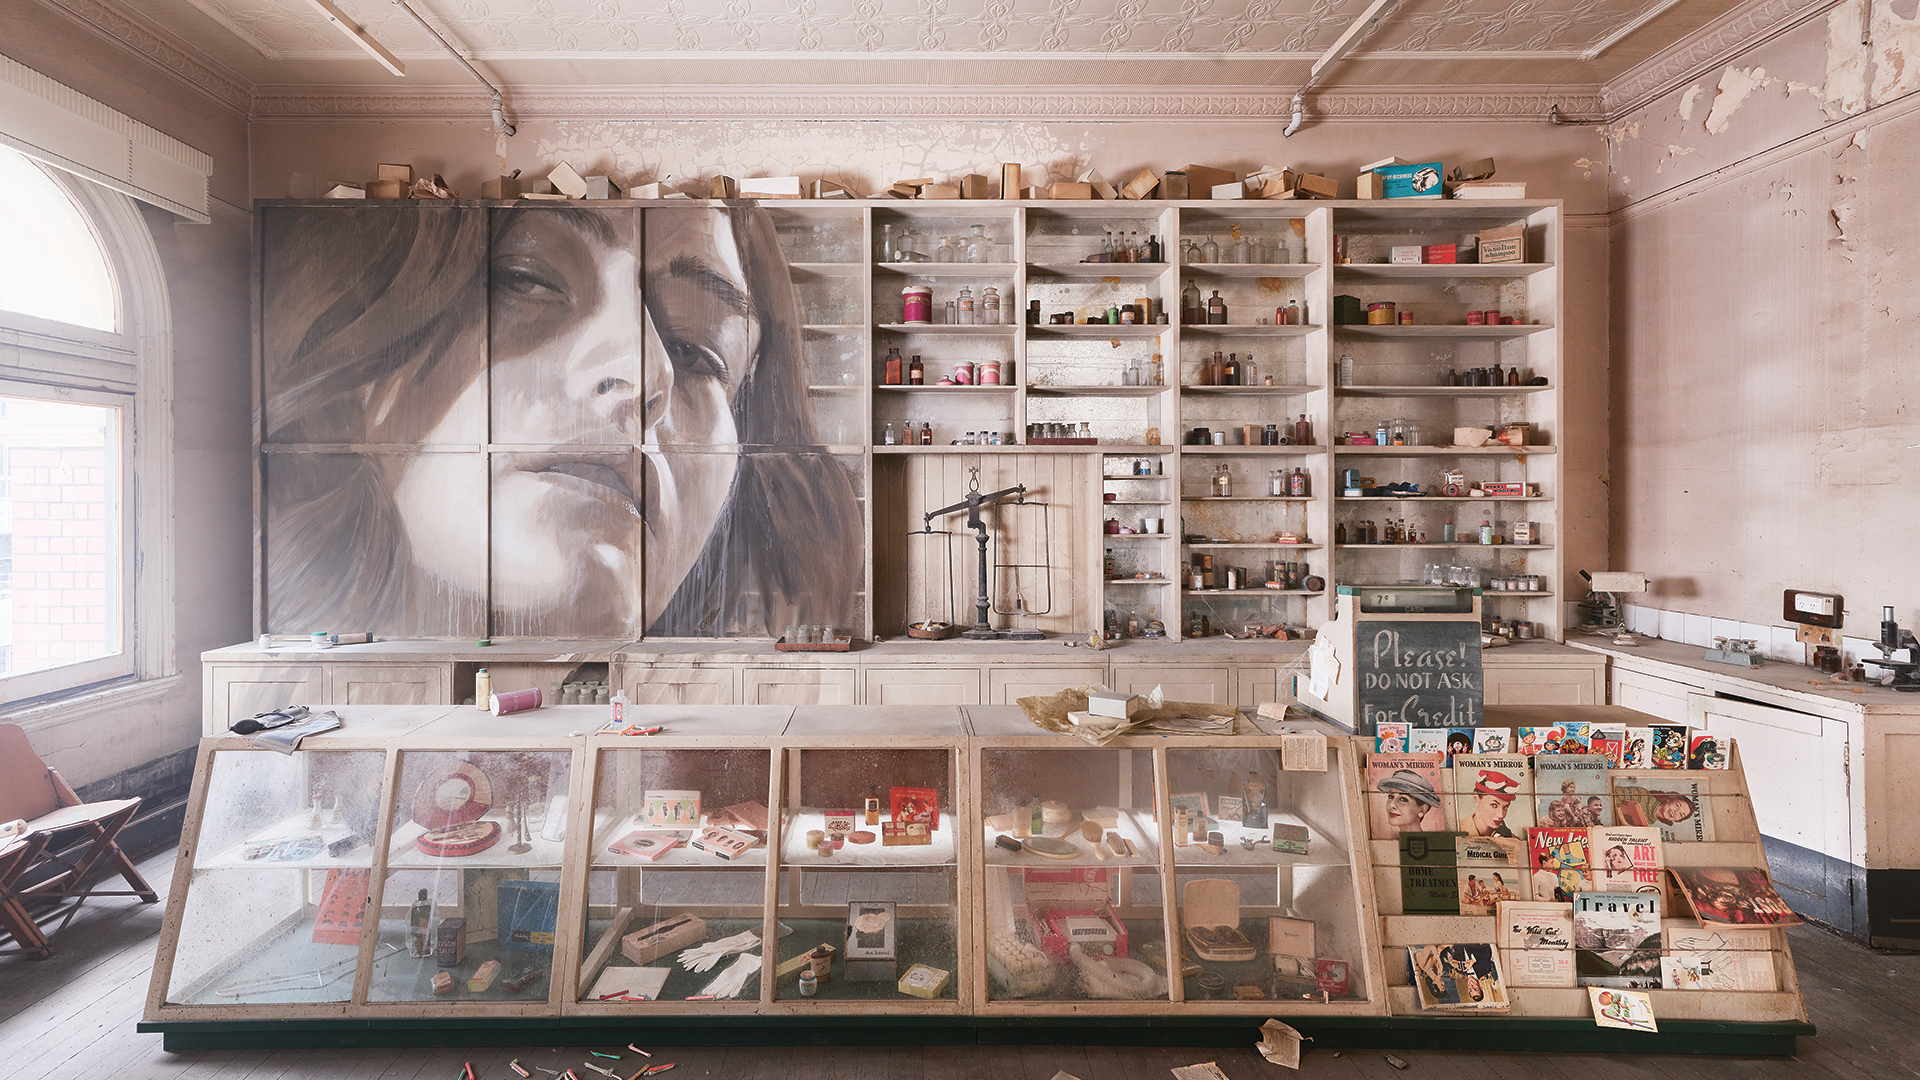 A woman's face painted into shelves